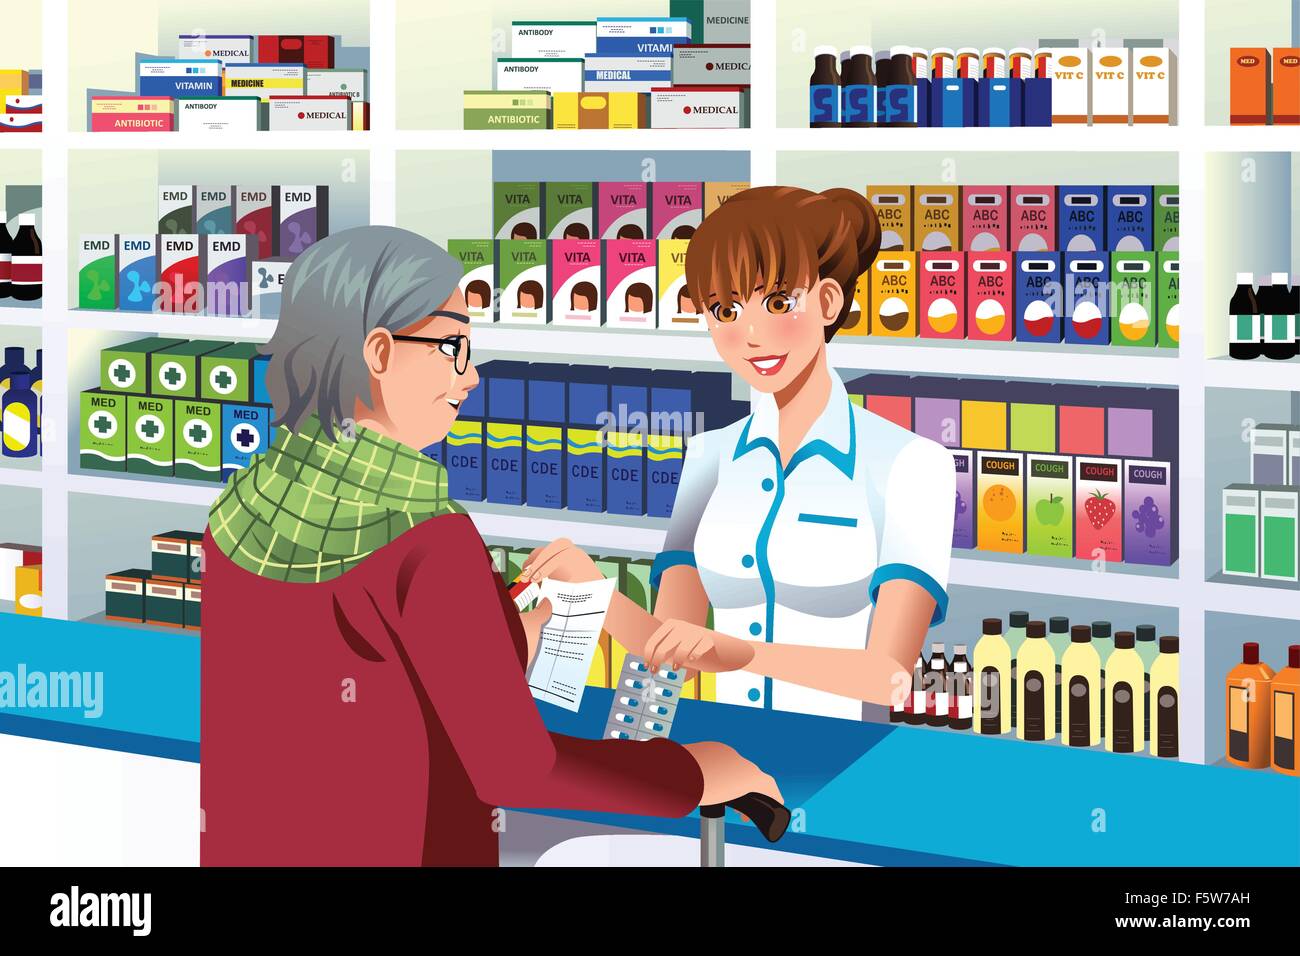 A vector illustration of pharmacist helping an elderly person in the pharmacy Stock Vector